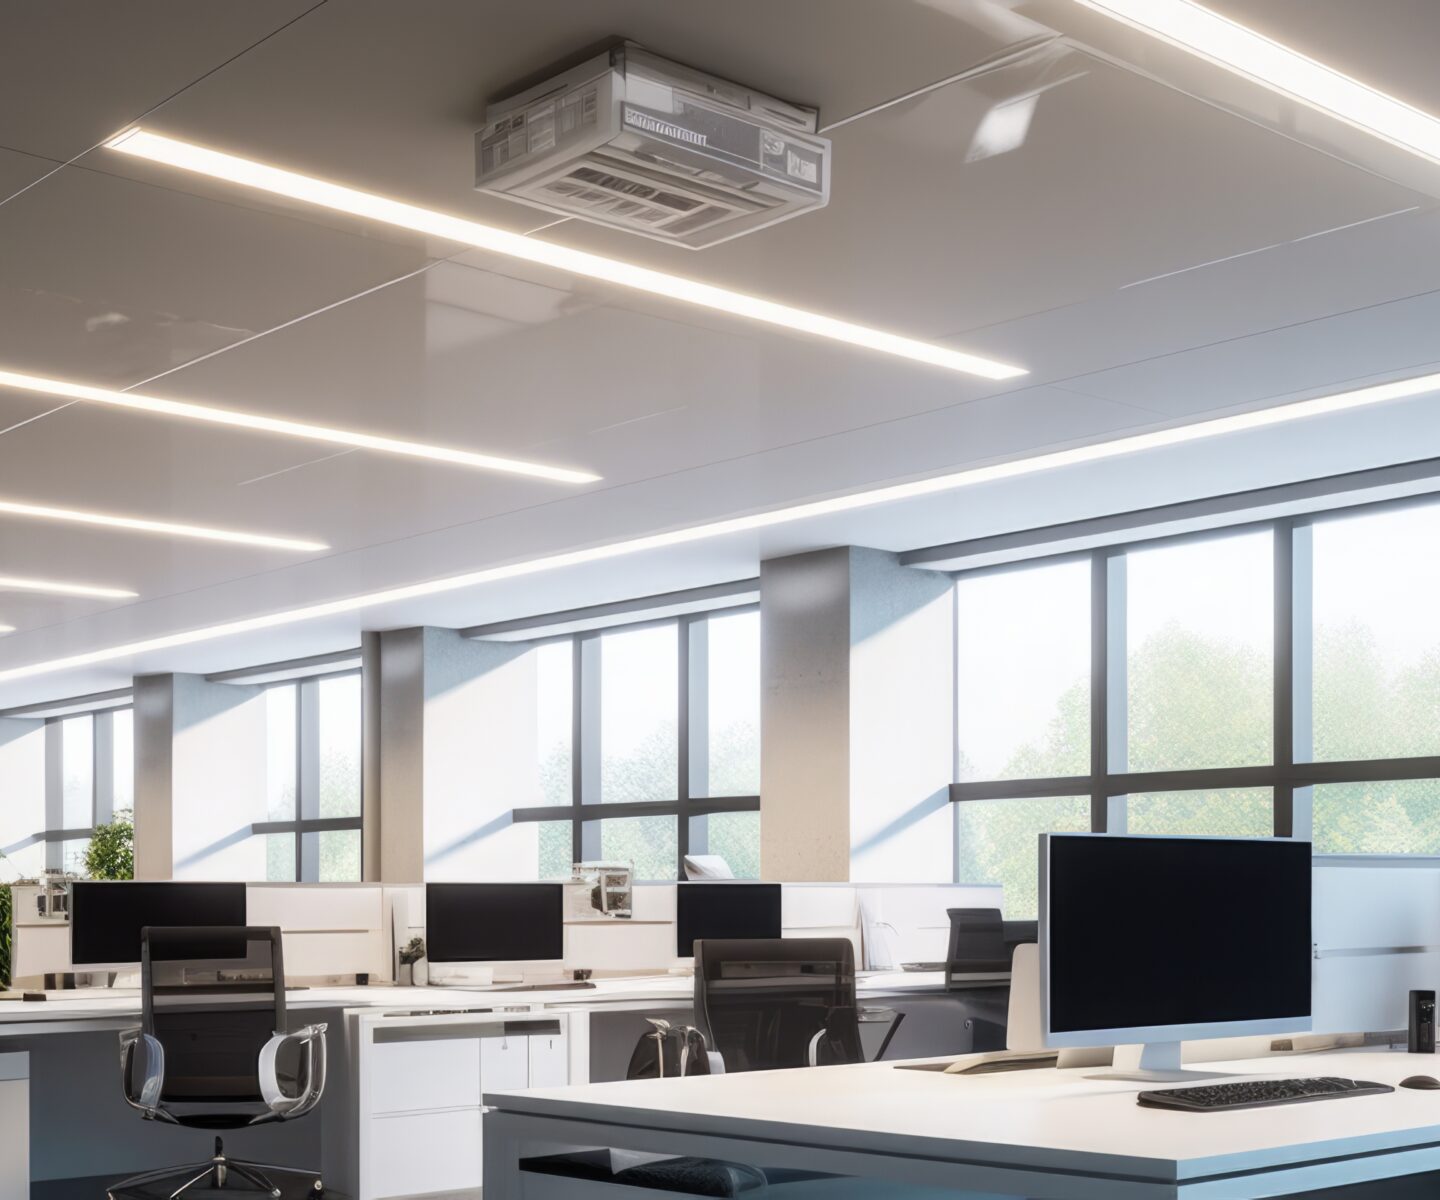 Popular types of office ceilings